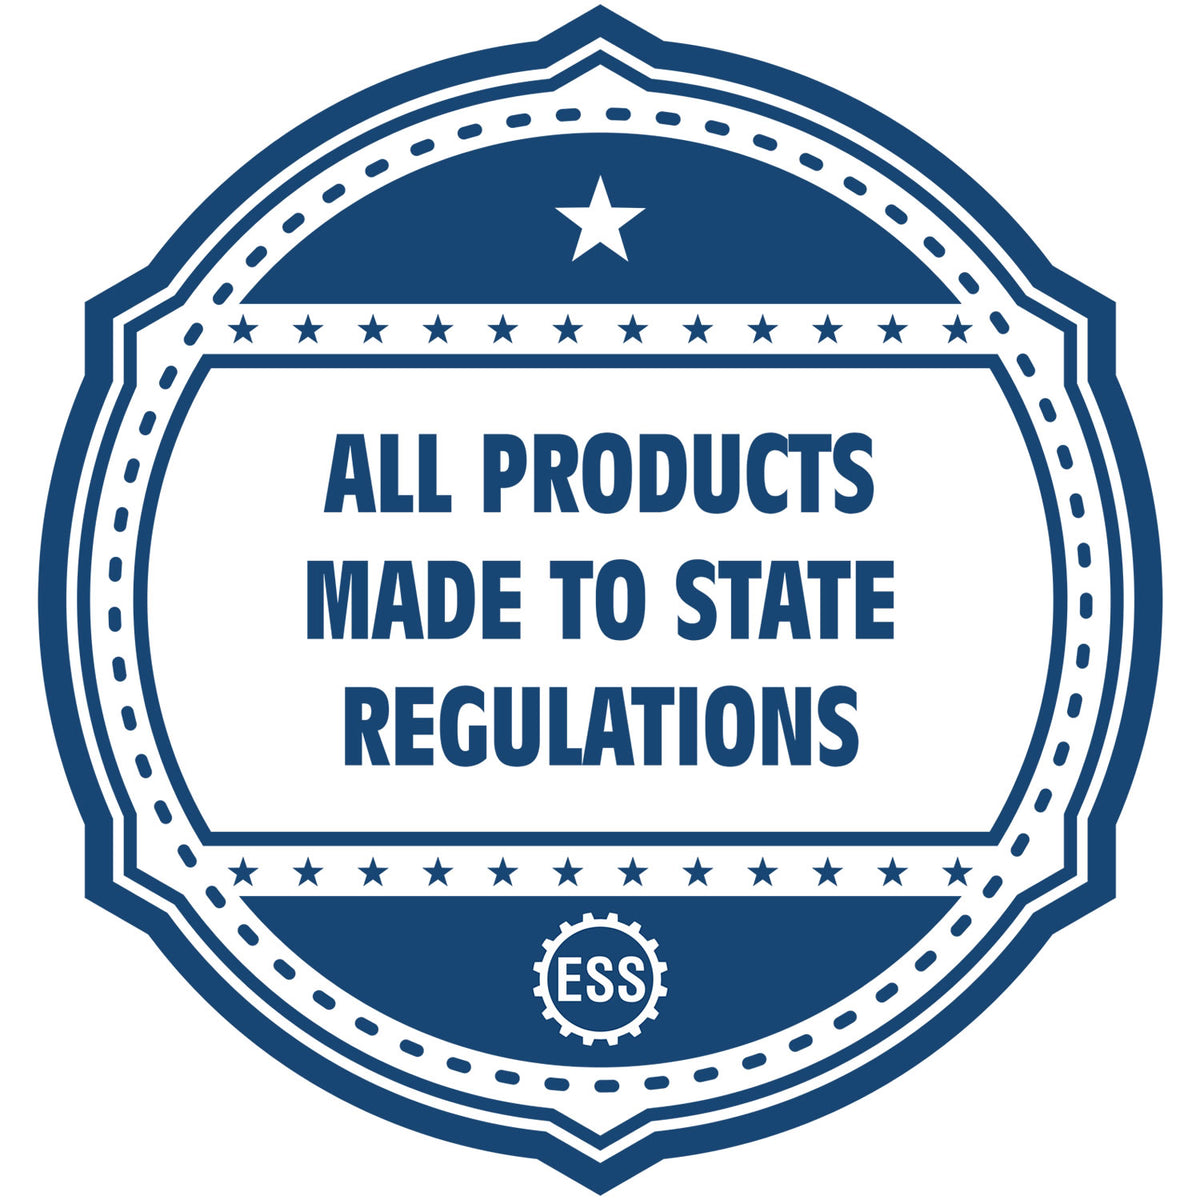 An icon or badge element for the Virginia Engineer Desk Seal showing that this product is made in compliance with state regulations.